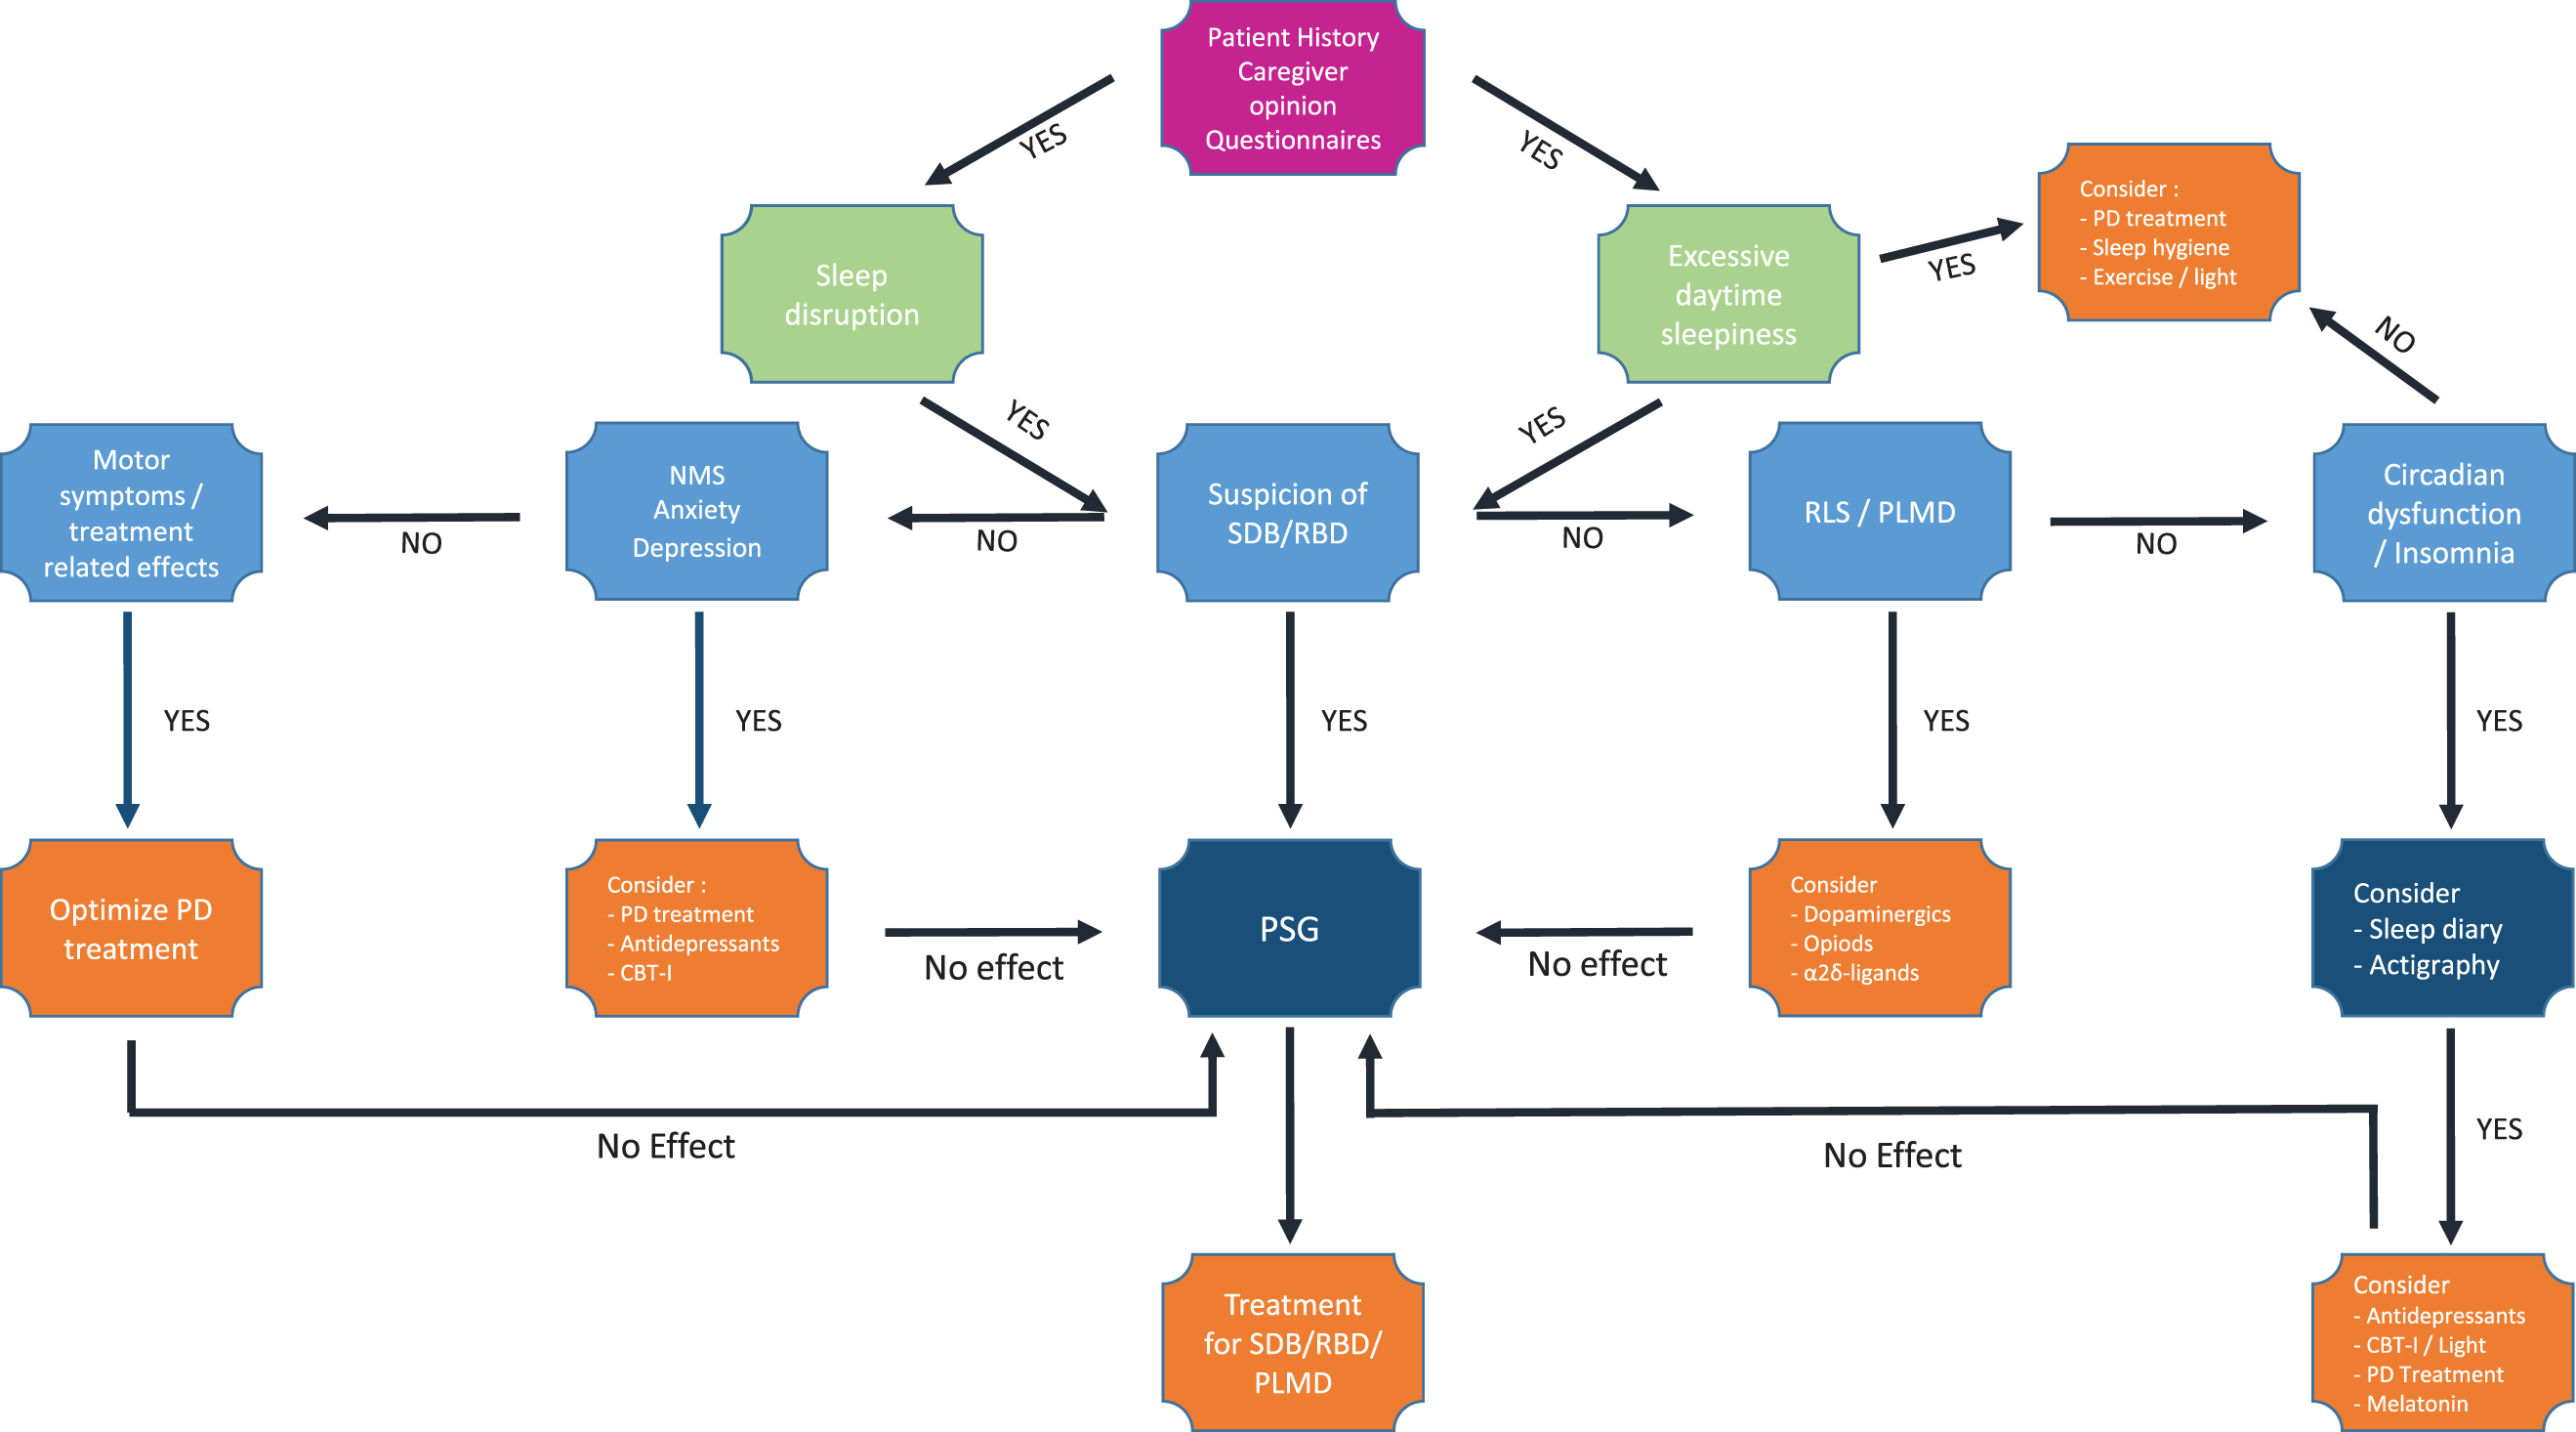 Diagnostic and therapeutic algorithm for sleep disturbances in Parkinson’s disease. Flowchart suggesting a comprehensive approach towards pragmatic diagnostic and therapeutic options for sleep disturbances in Parkinson’s disease. CBT-I, Cognitive behavioral therapy for insomnia; NMS, non-motor symptoms; PD, Parkinson’s disease; PLMD, Periodic limb movement disorder; RBD, REM sleep behavior disorder; RLS, restless legs syndrome; SDB, sleep disordered breathing; vPSG, video polysomnography.